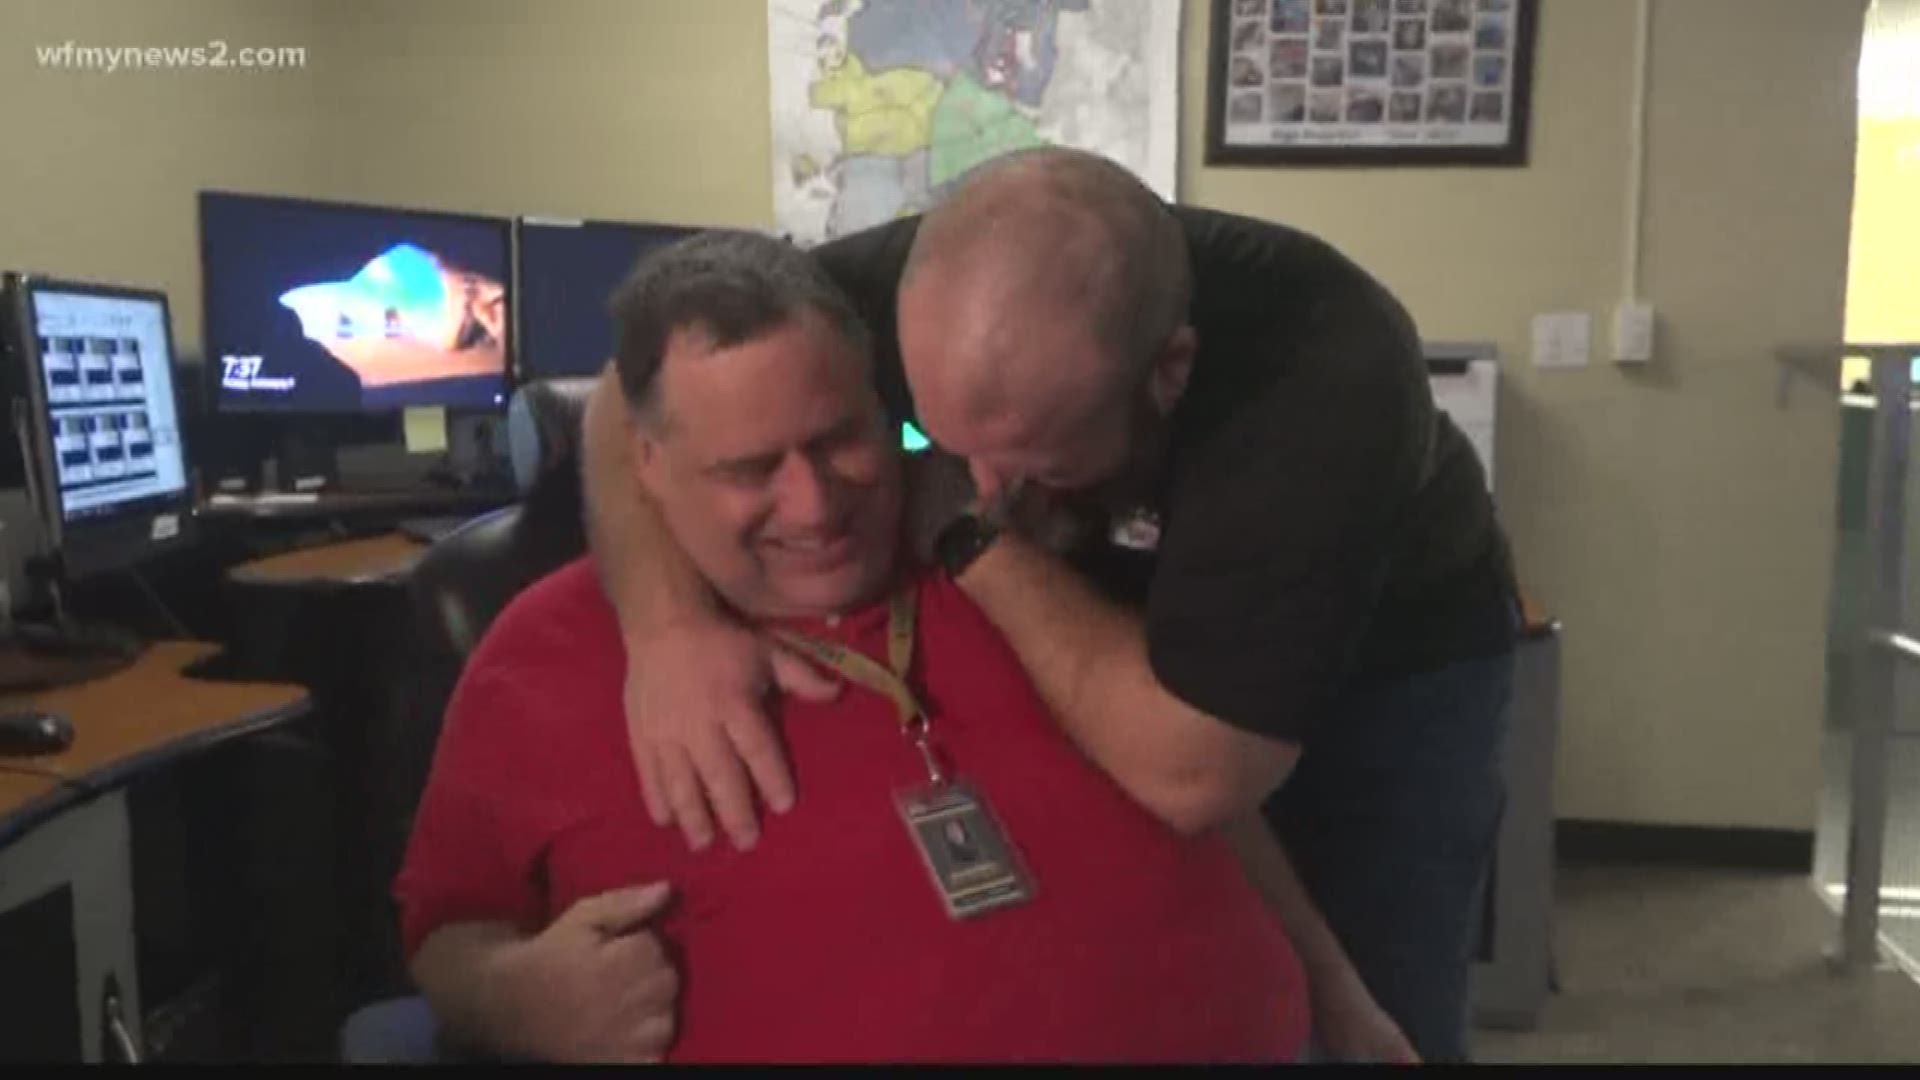 Our camera was rolling for a must-see reunion - almost a month after a High Point 911 operator had an emergency of his own on the job.